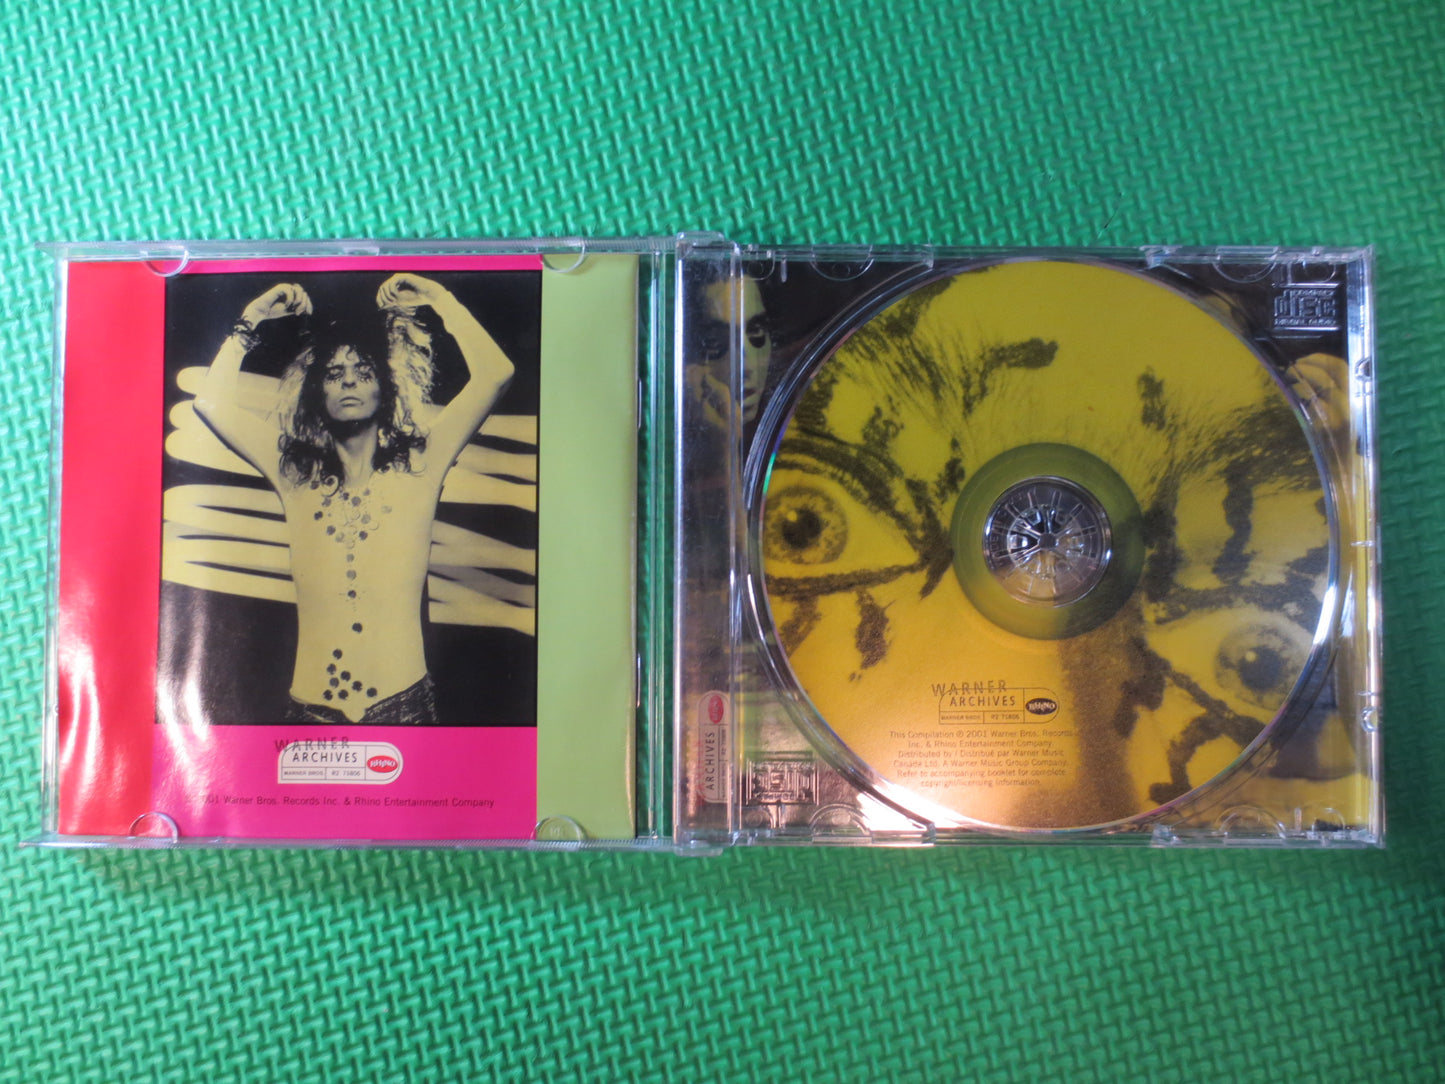 ALICE COOPER, MASCARA and Monsters, Alice Cooper Cd, Alice Cooper Lp, Music Cd, Rock Cd, Pop Music Cd, Rock Compact Disc